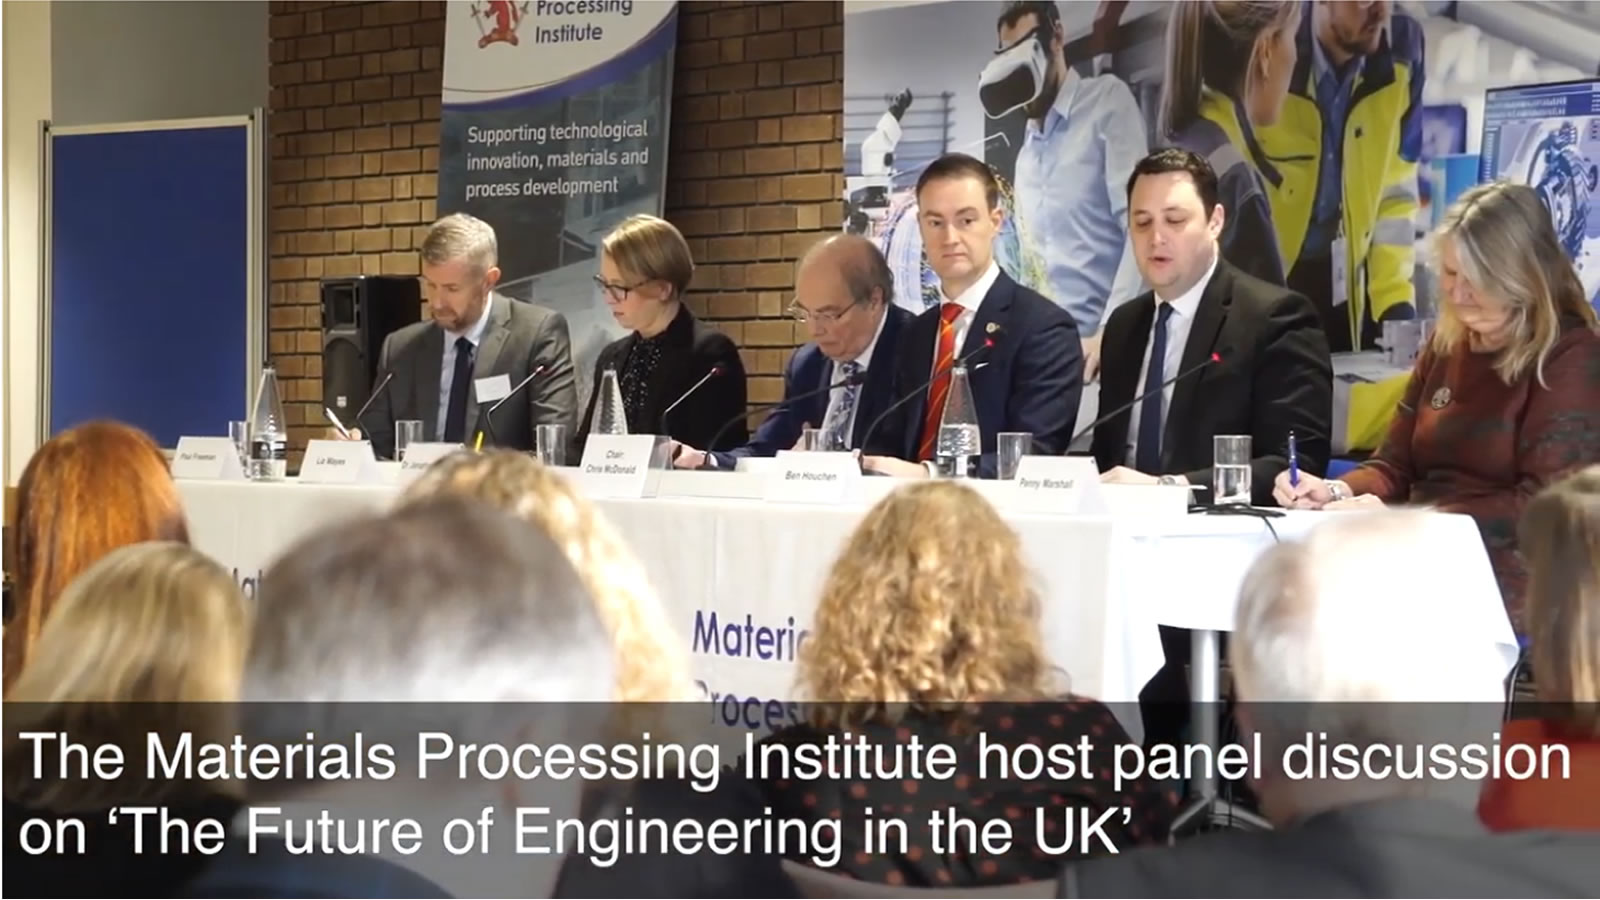 The Materials Processing Institute host panel discussion on 'The Future of Engineering in the UK' - January 2020